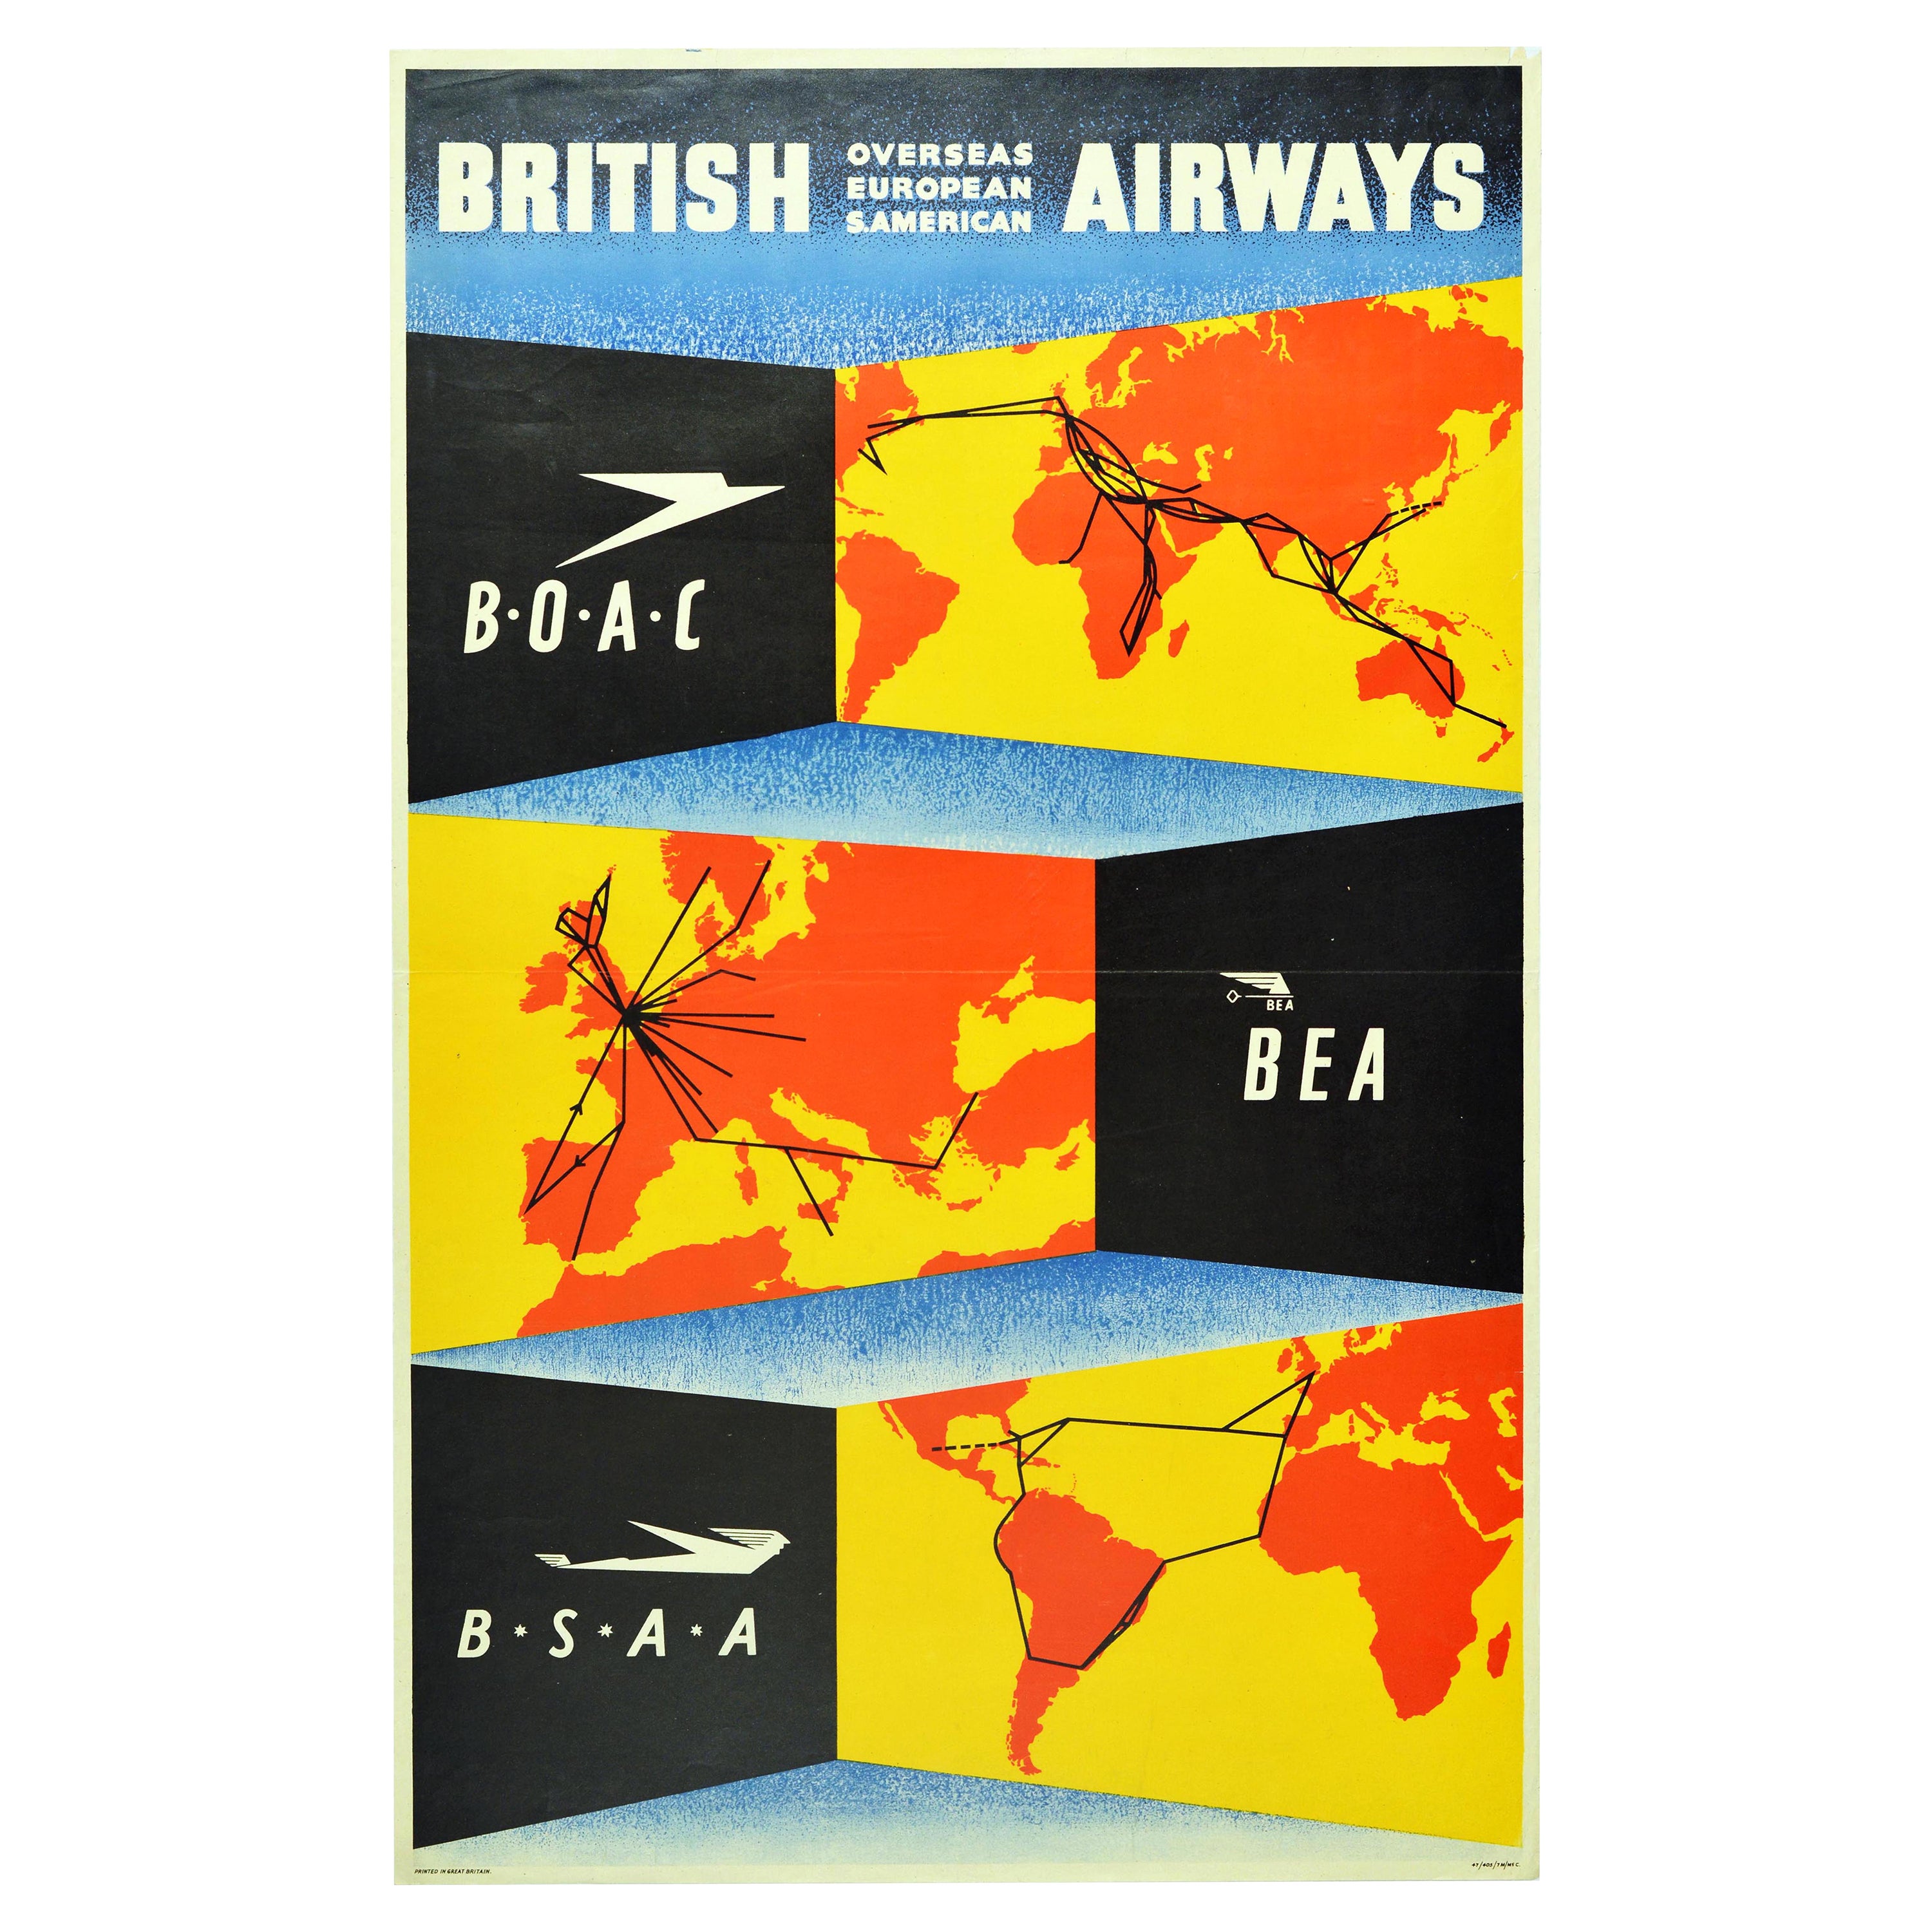 Original Vintage Poster British Airways BOAC BSAA BEA World Route Map Air Travel